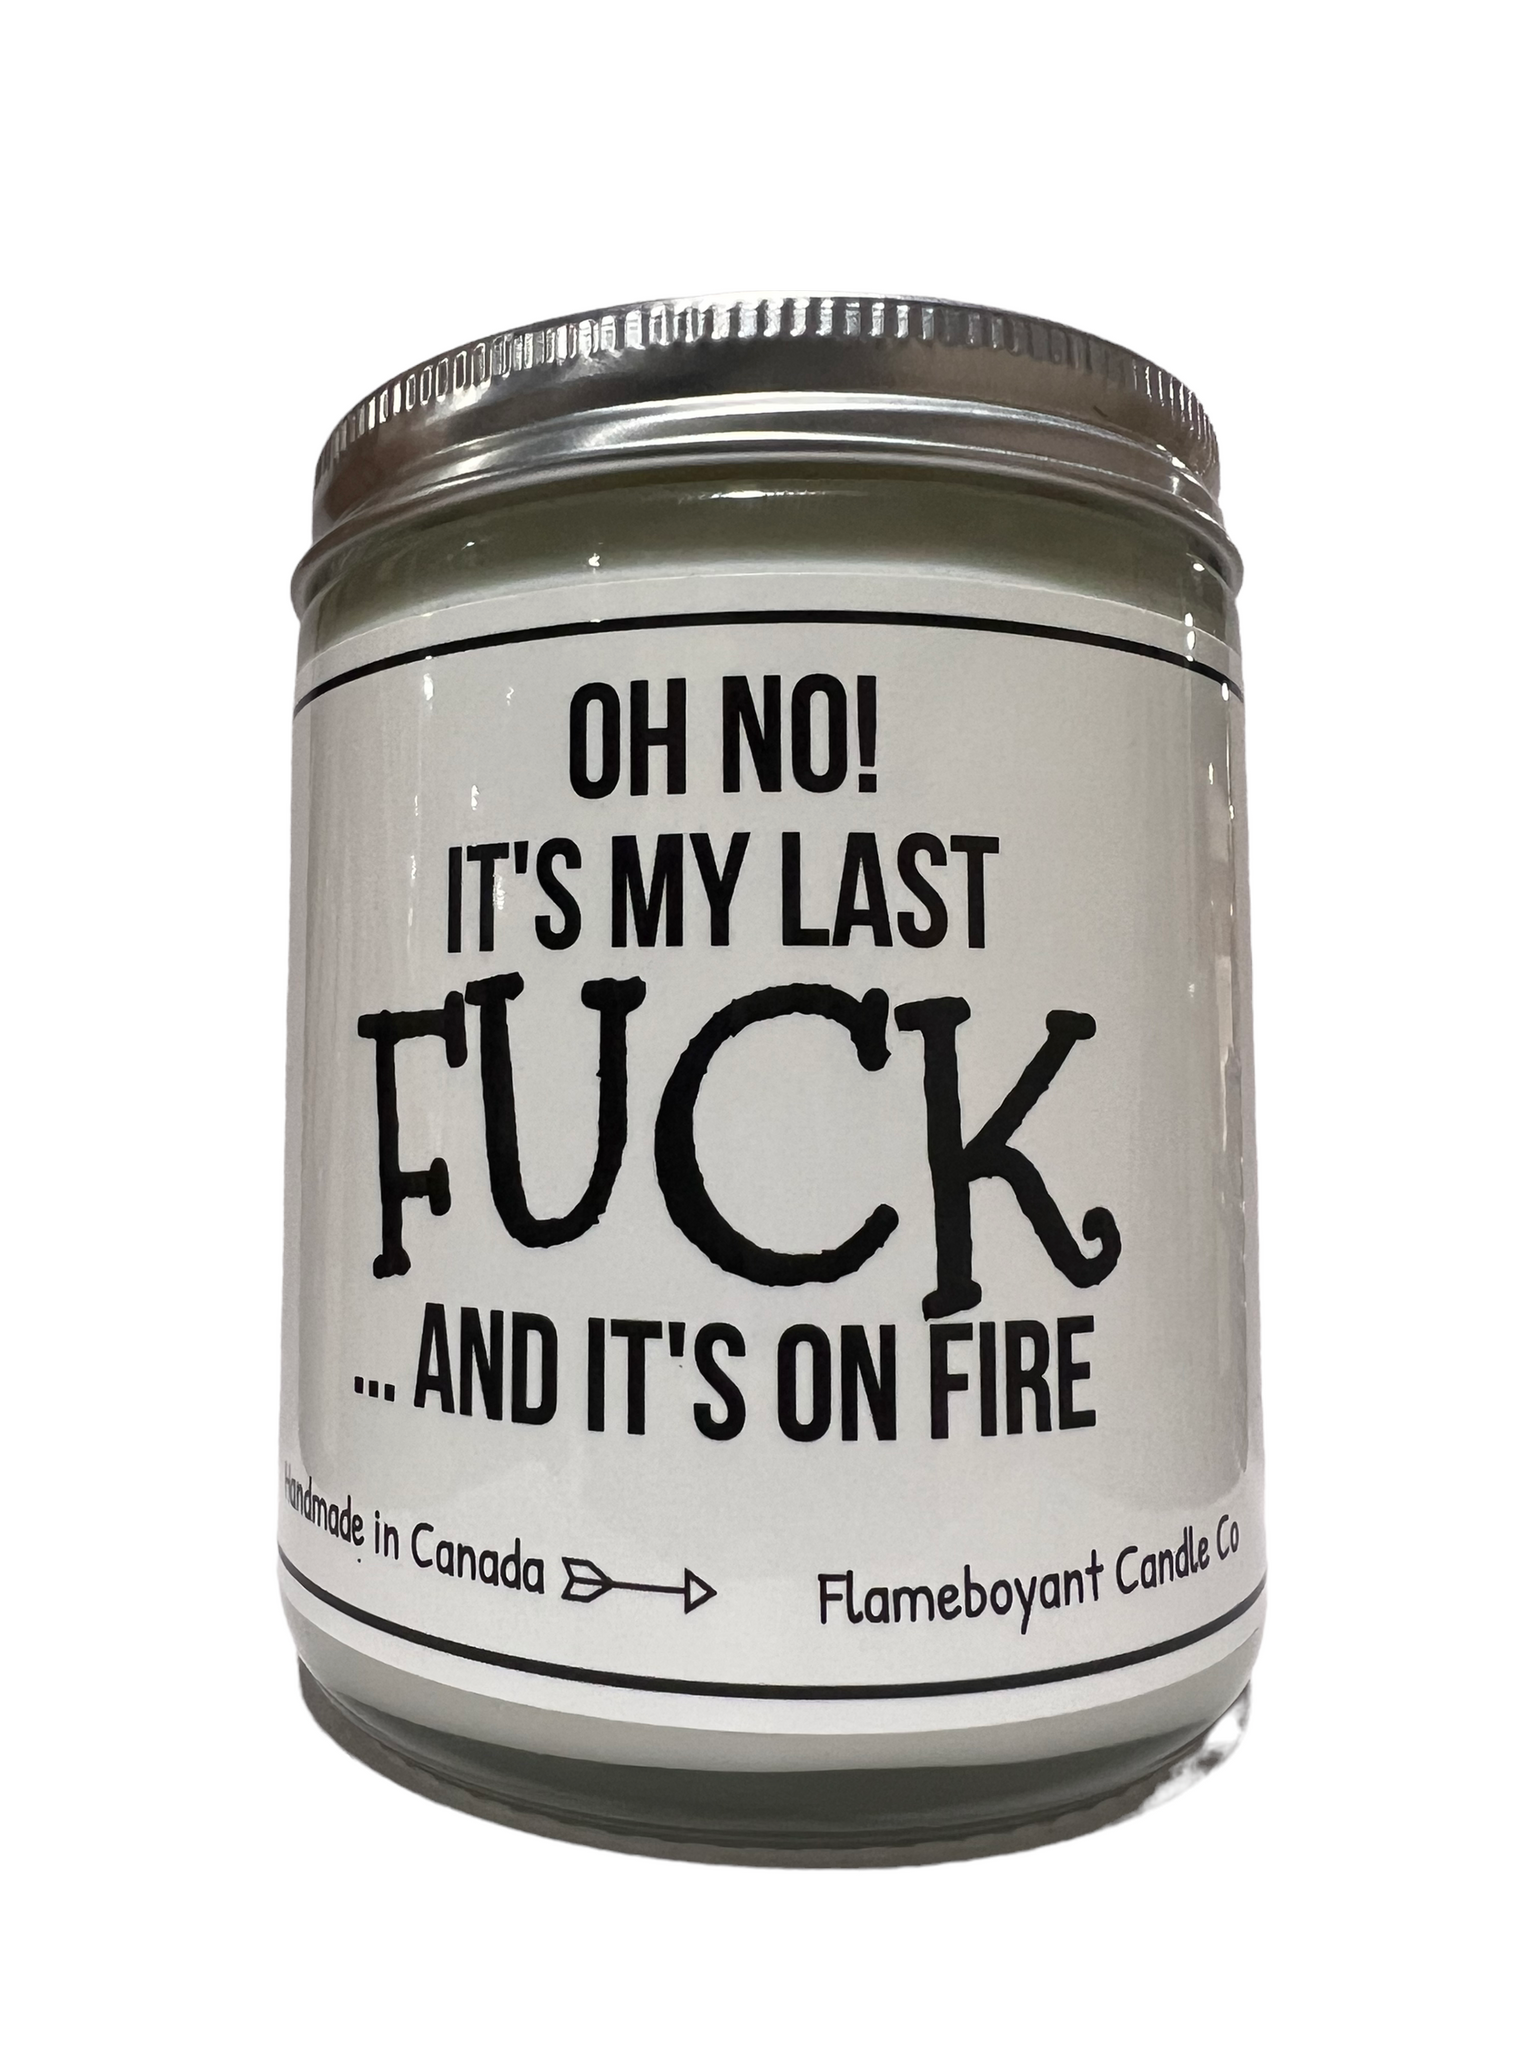 Oh no! its my last fuck and its on fire